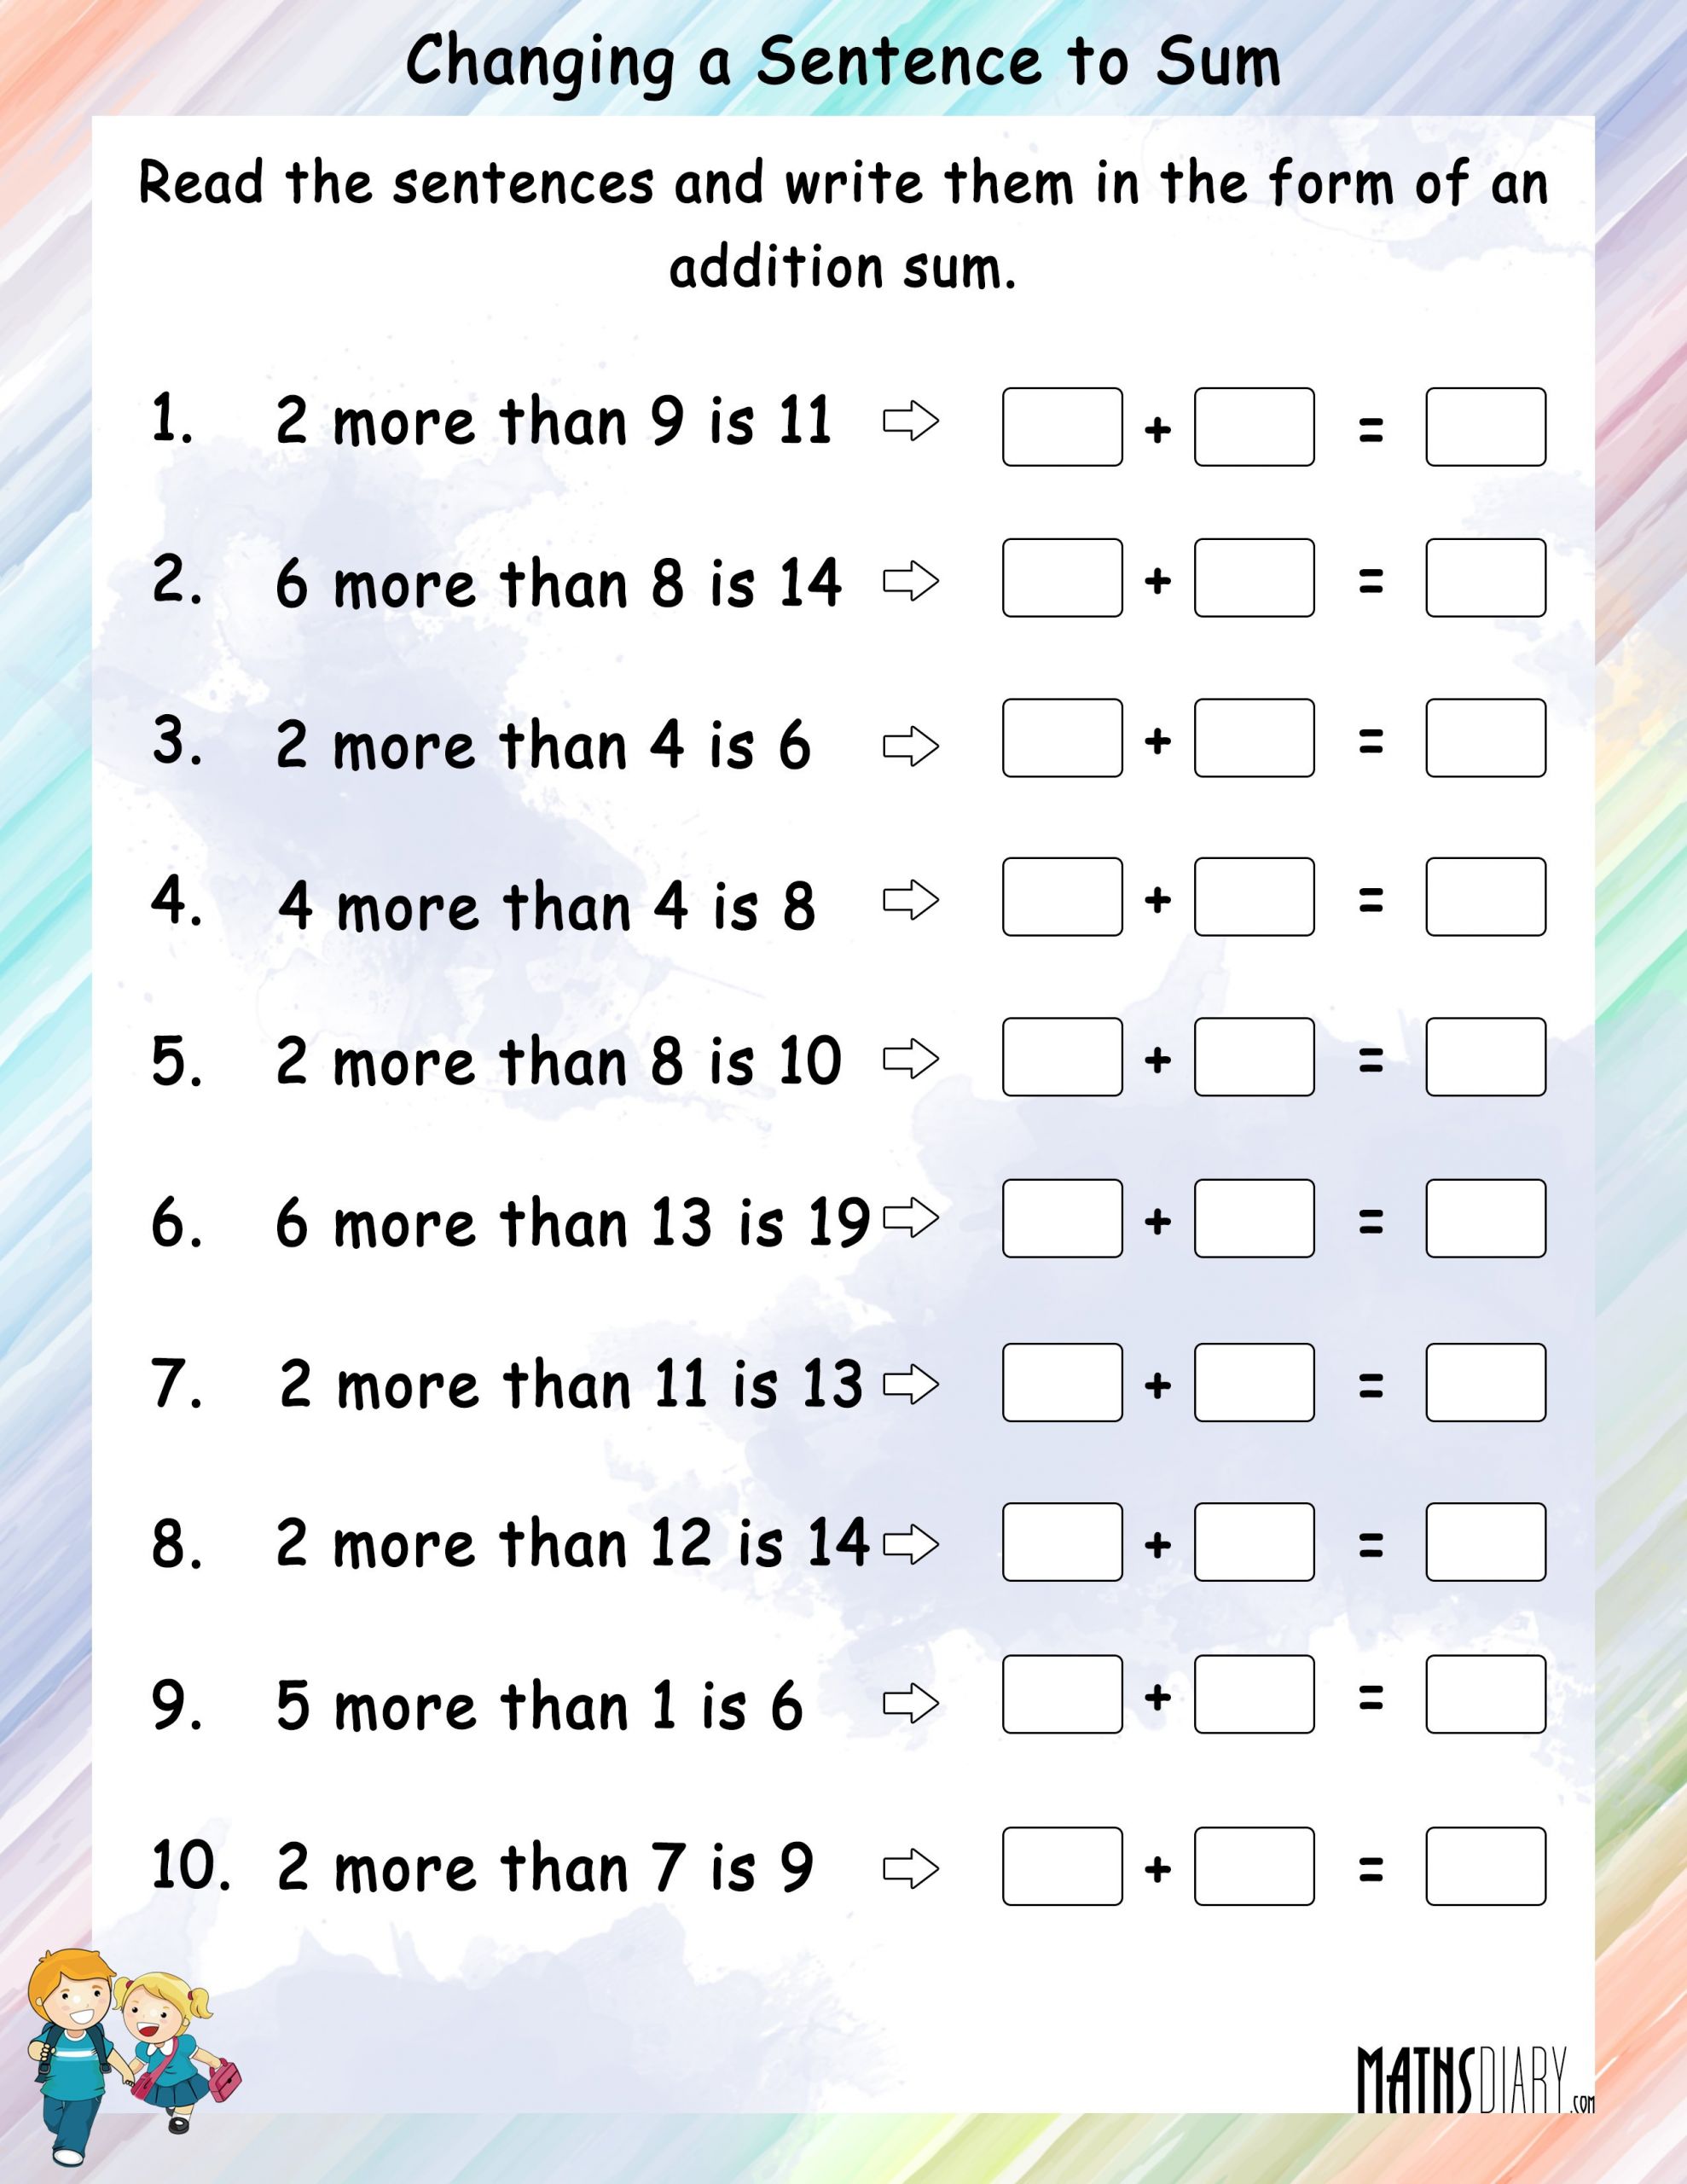 Free Math Worksheets Second Grade 2 Counting Money Counting Money Pennies Nickels Dimes Quarters